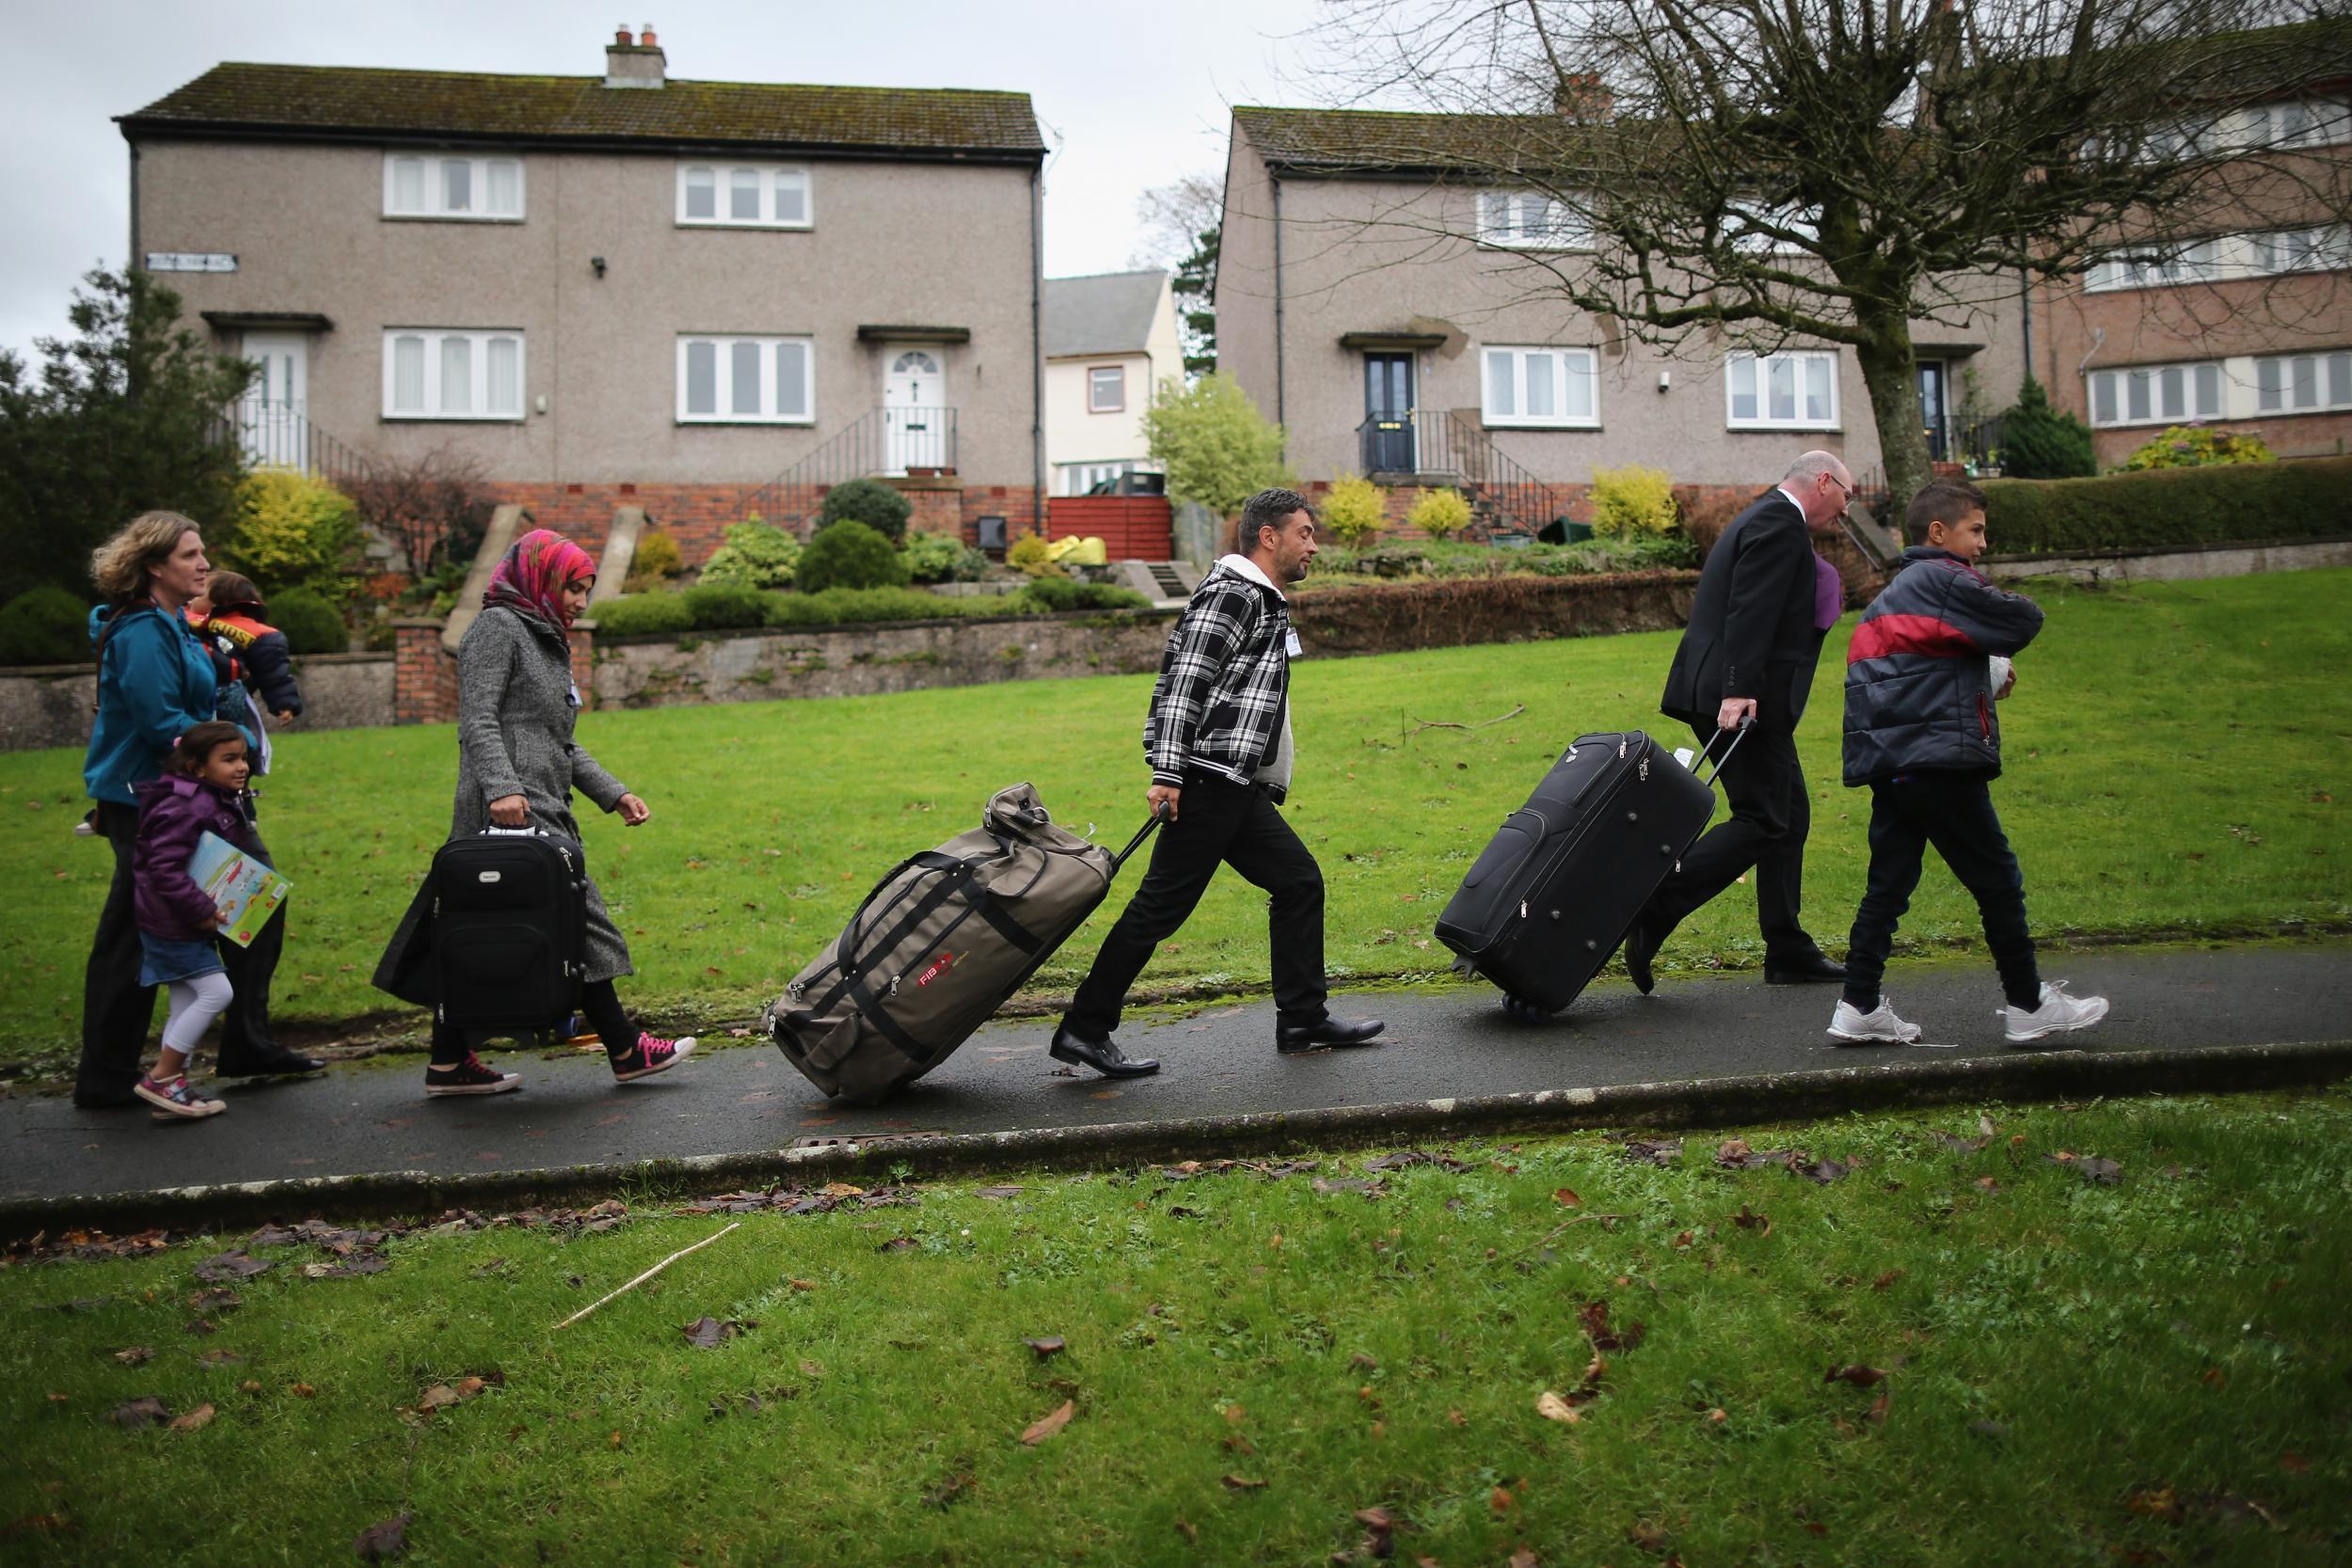 Syrian refugees arrive at their new home in Scotland (Getty Images)